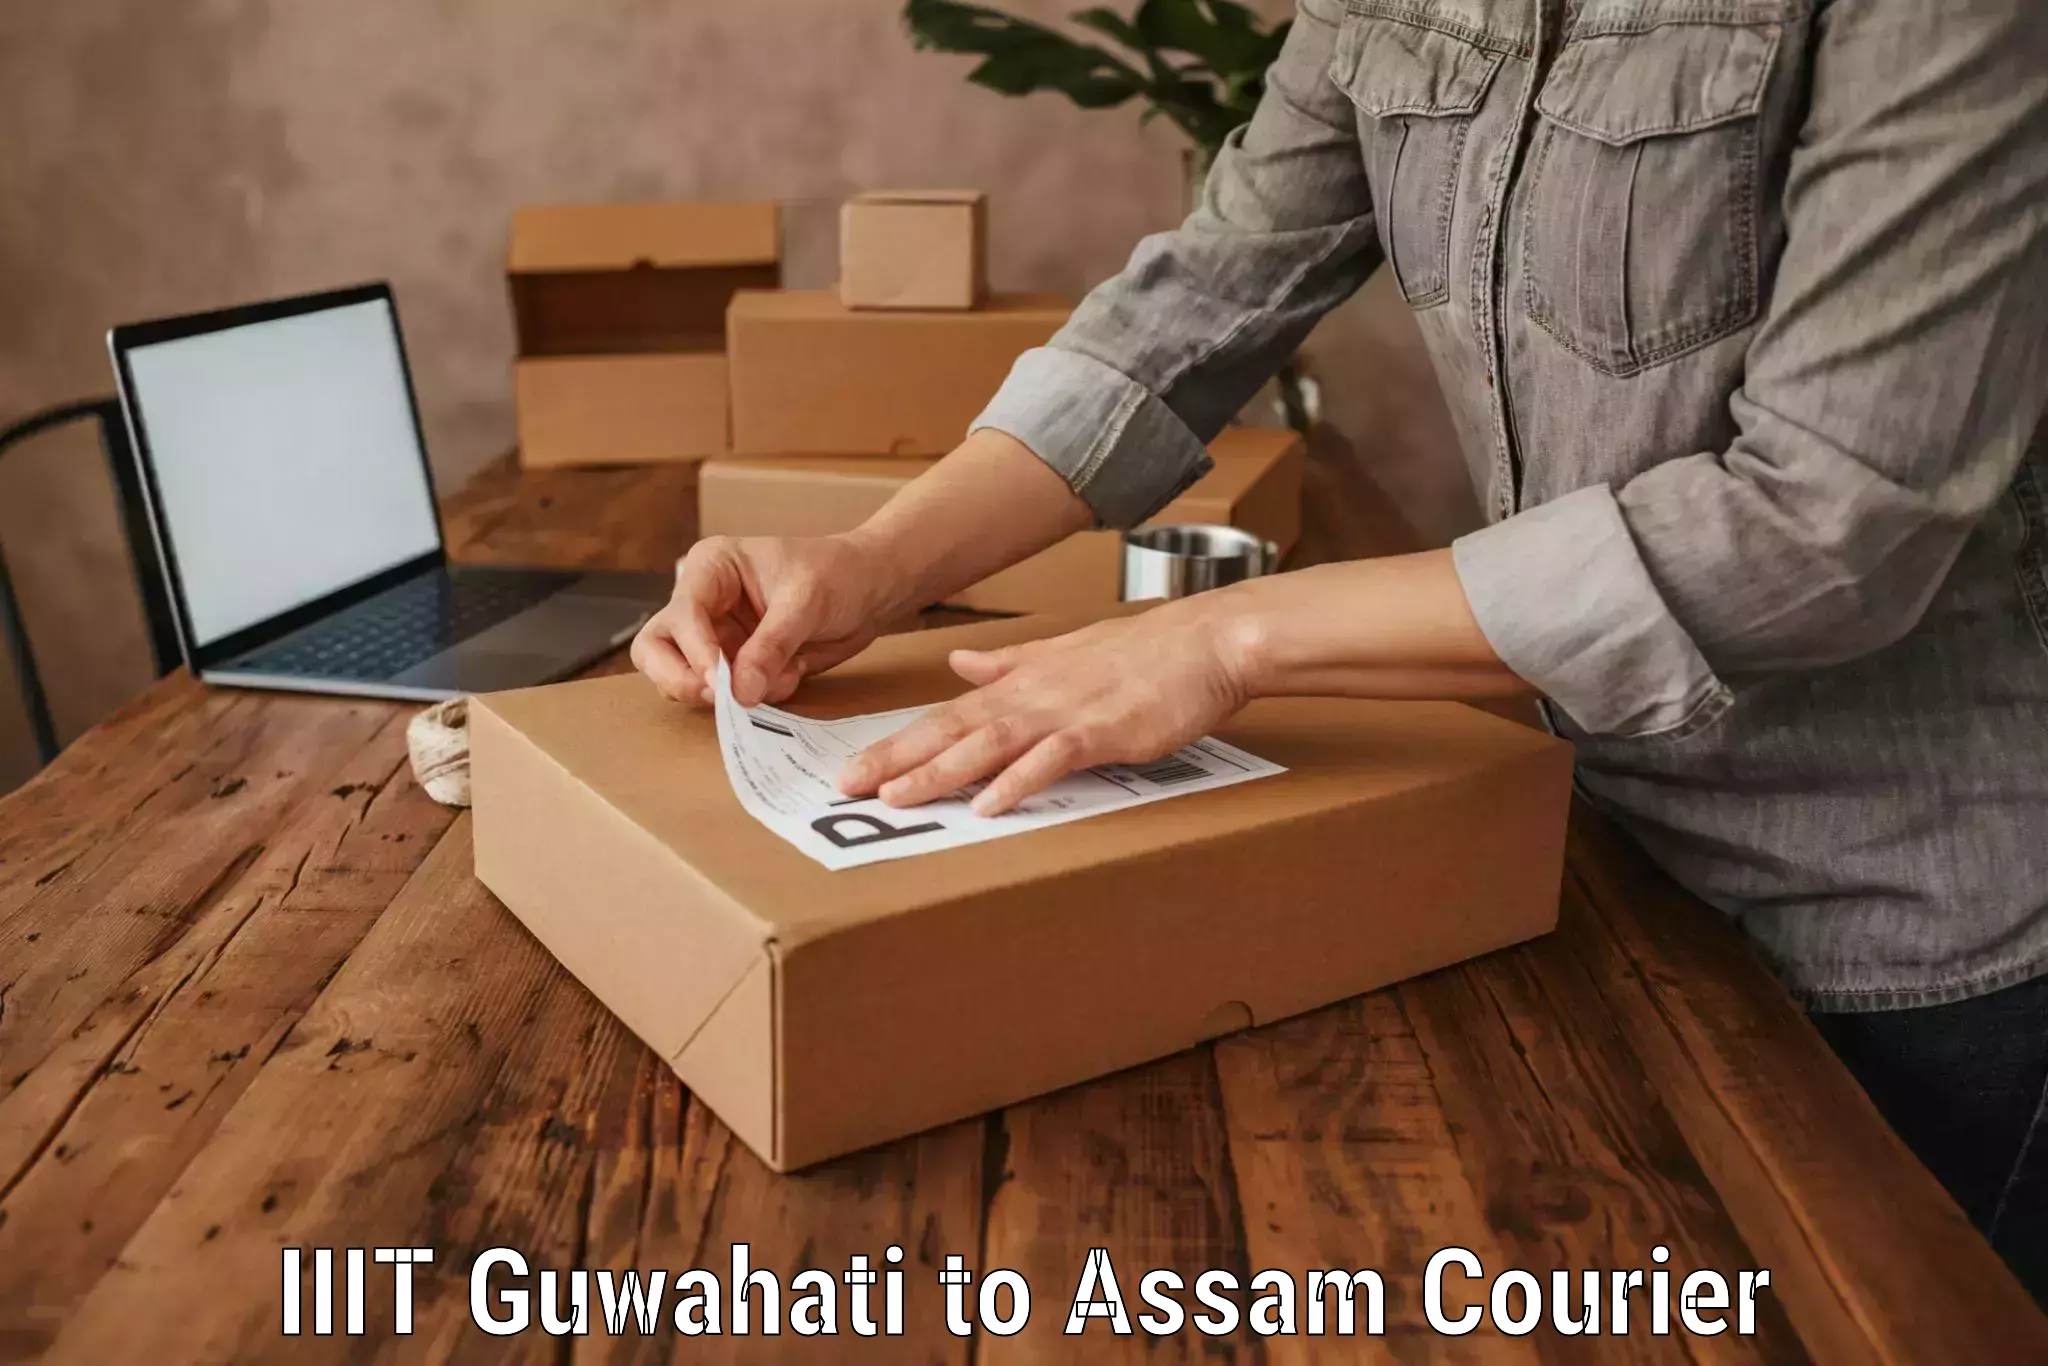 Luggage delivery system IIIT Guwahati to Dibrugarh University